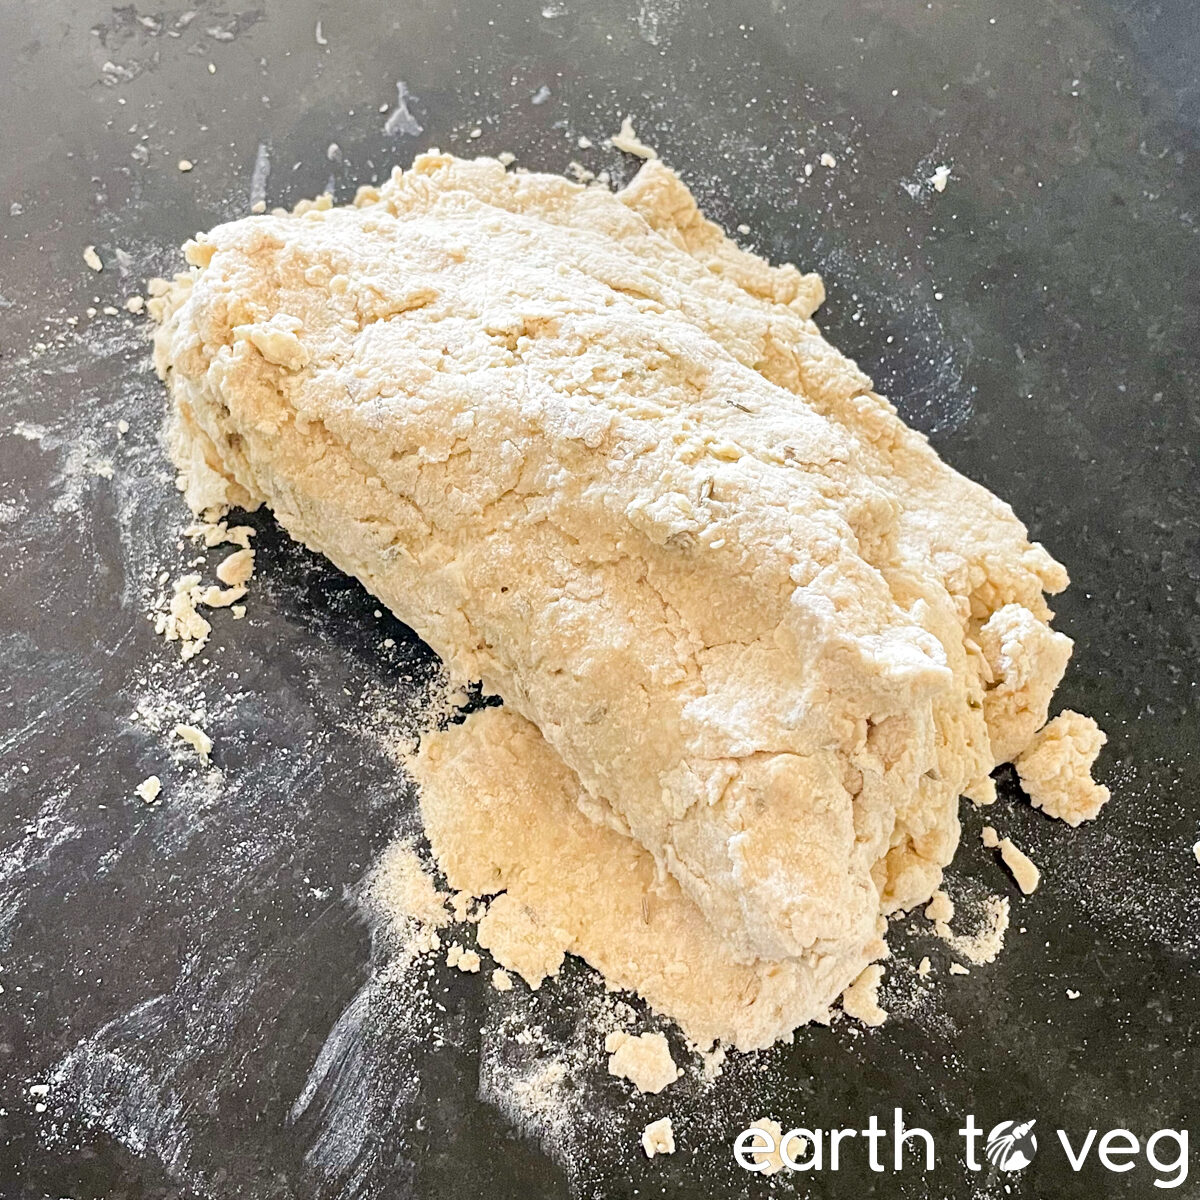 The soda bread dough is patted into a rough rectangular shape.